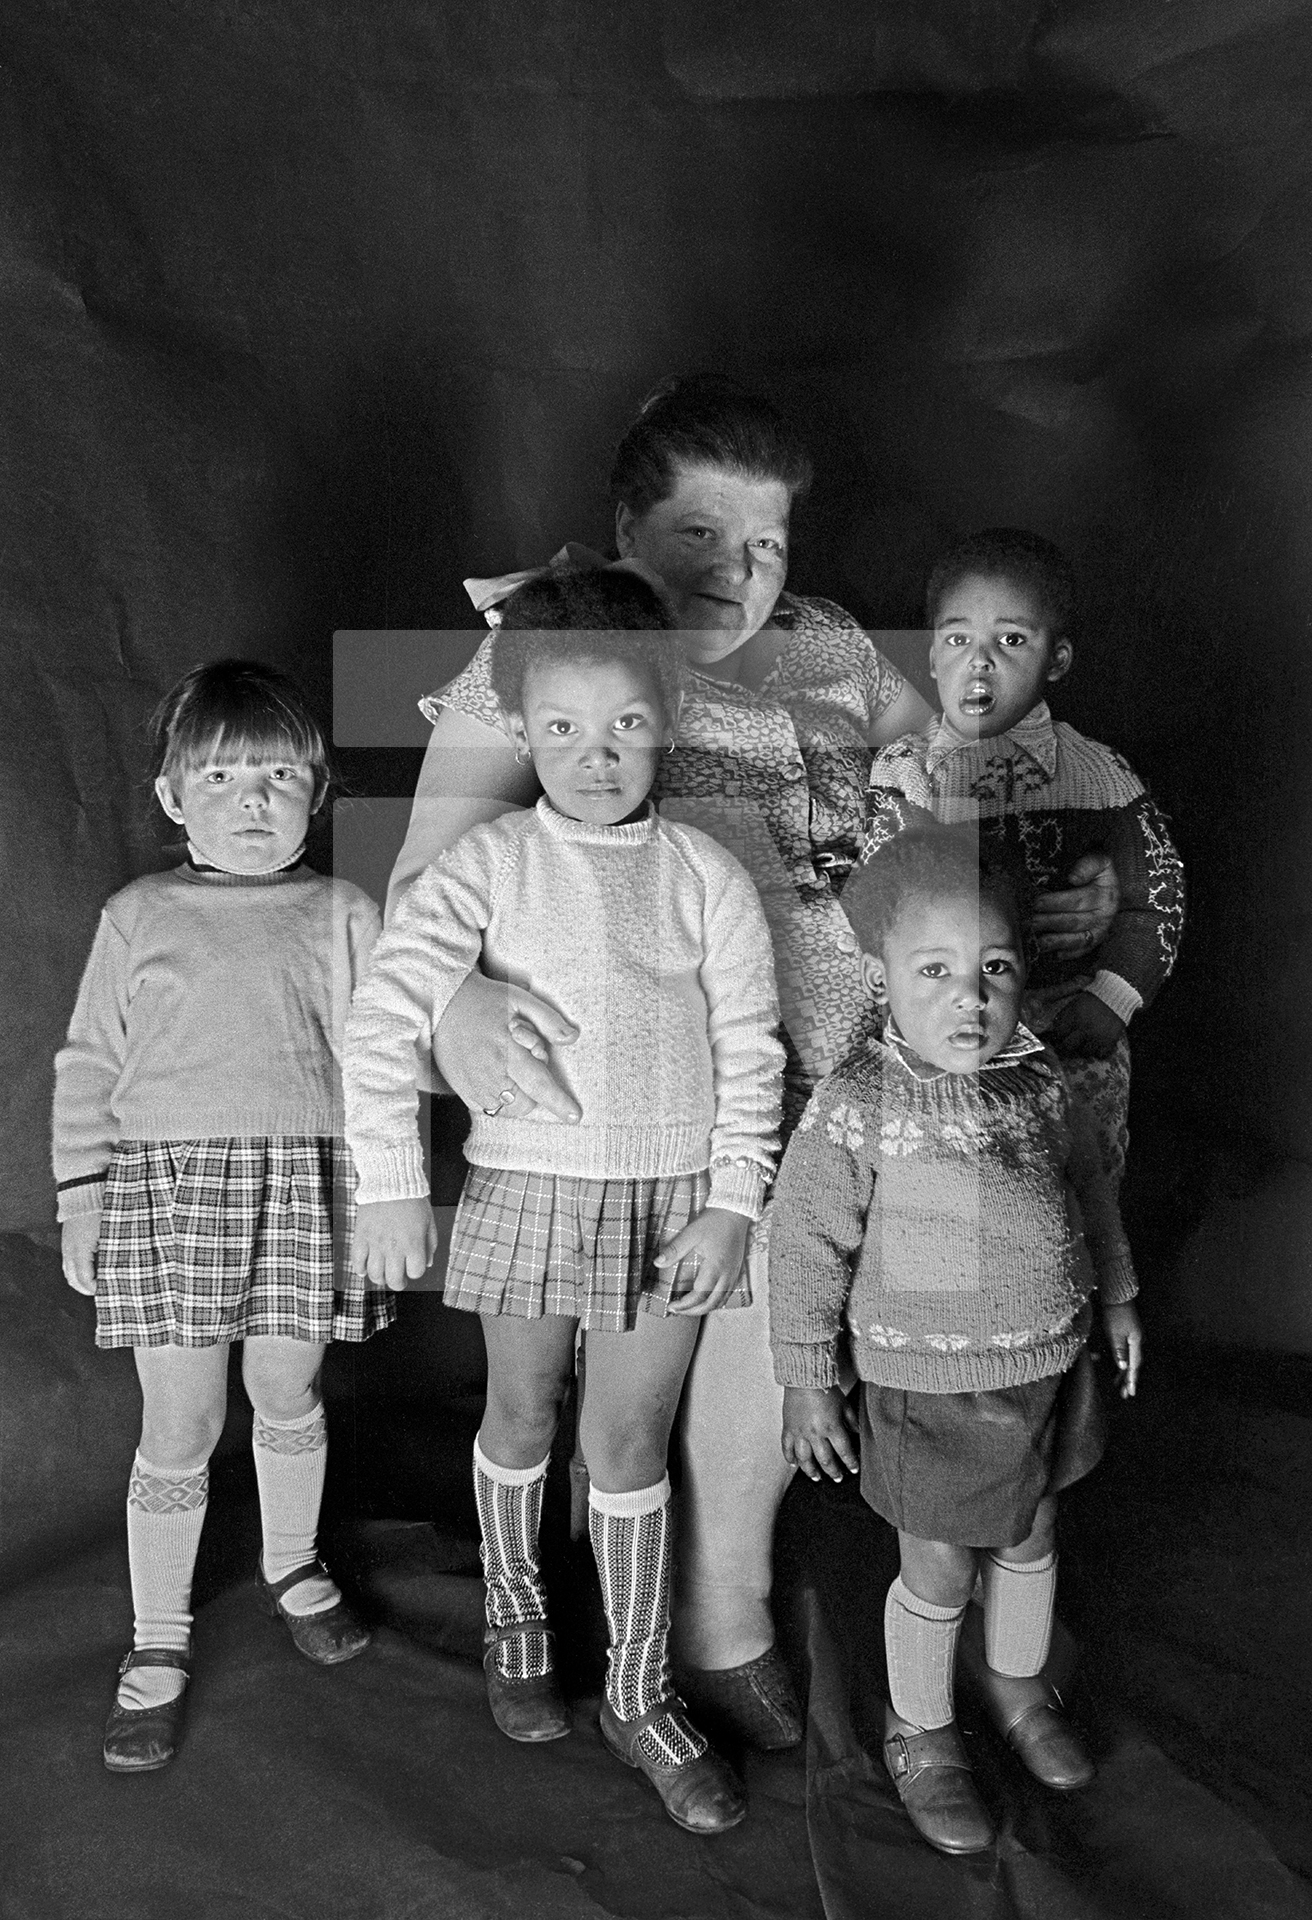 Foster mother with children. Group portrait from The Shop on Greame Street, Moss Side, Manchester. February-April 1972 by Daniel Meadows